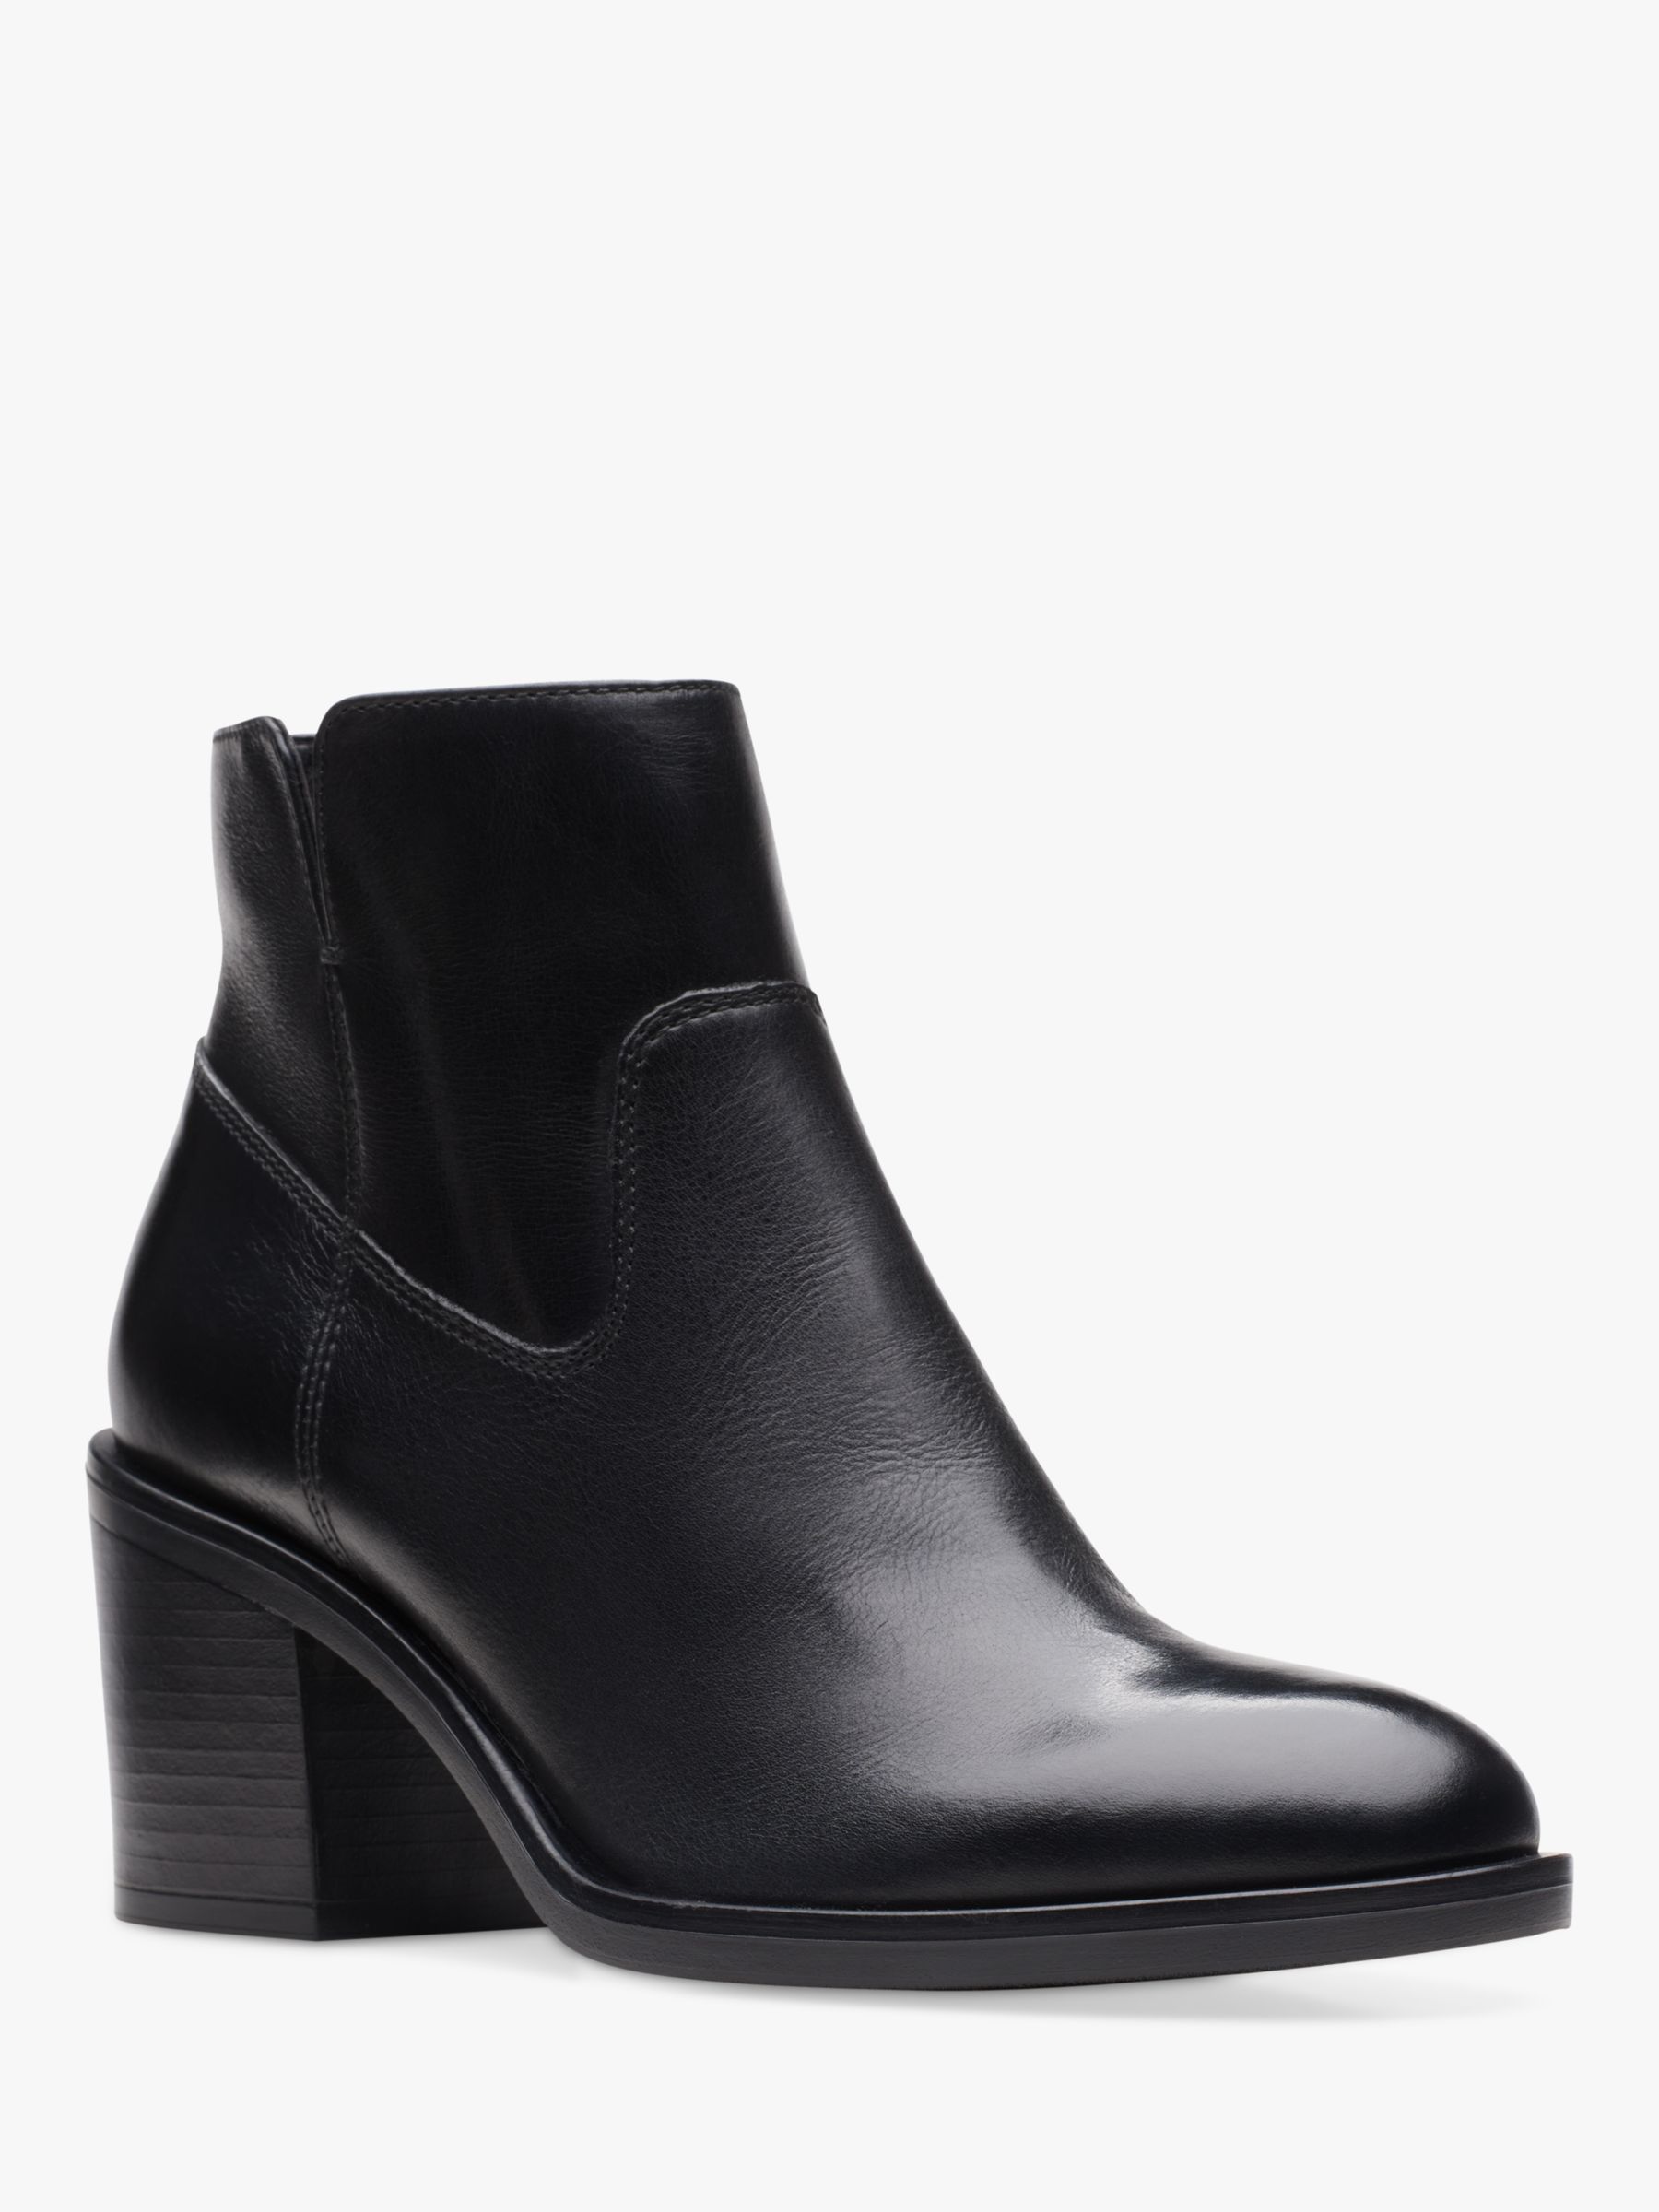 Clarks Valvestino Lo Leather Ankle Boots, Black at John Lewis & Partners